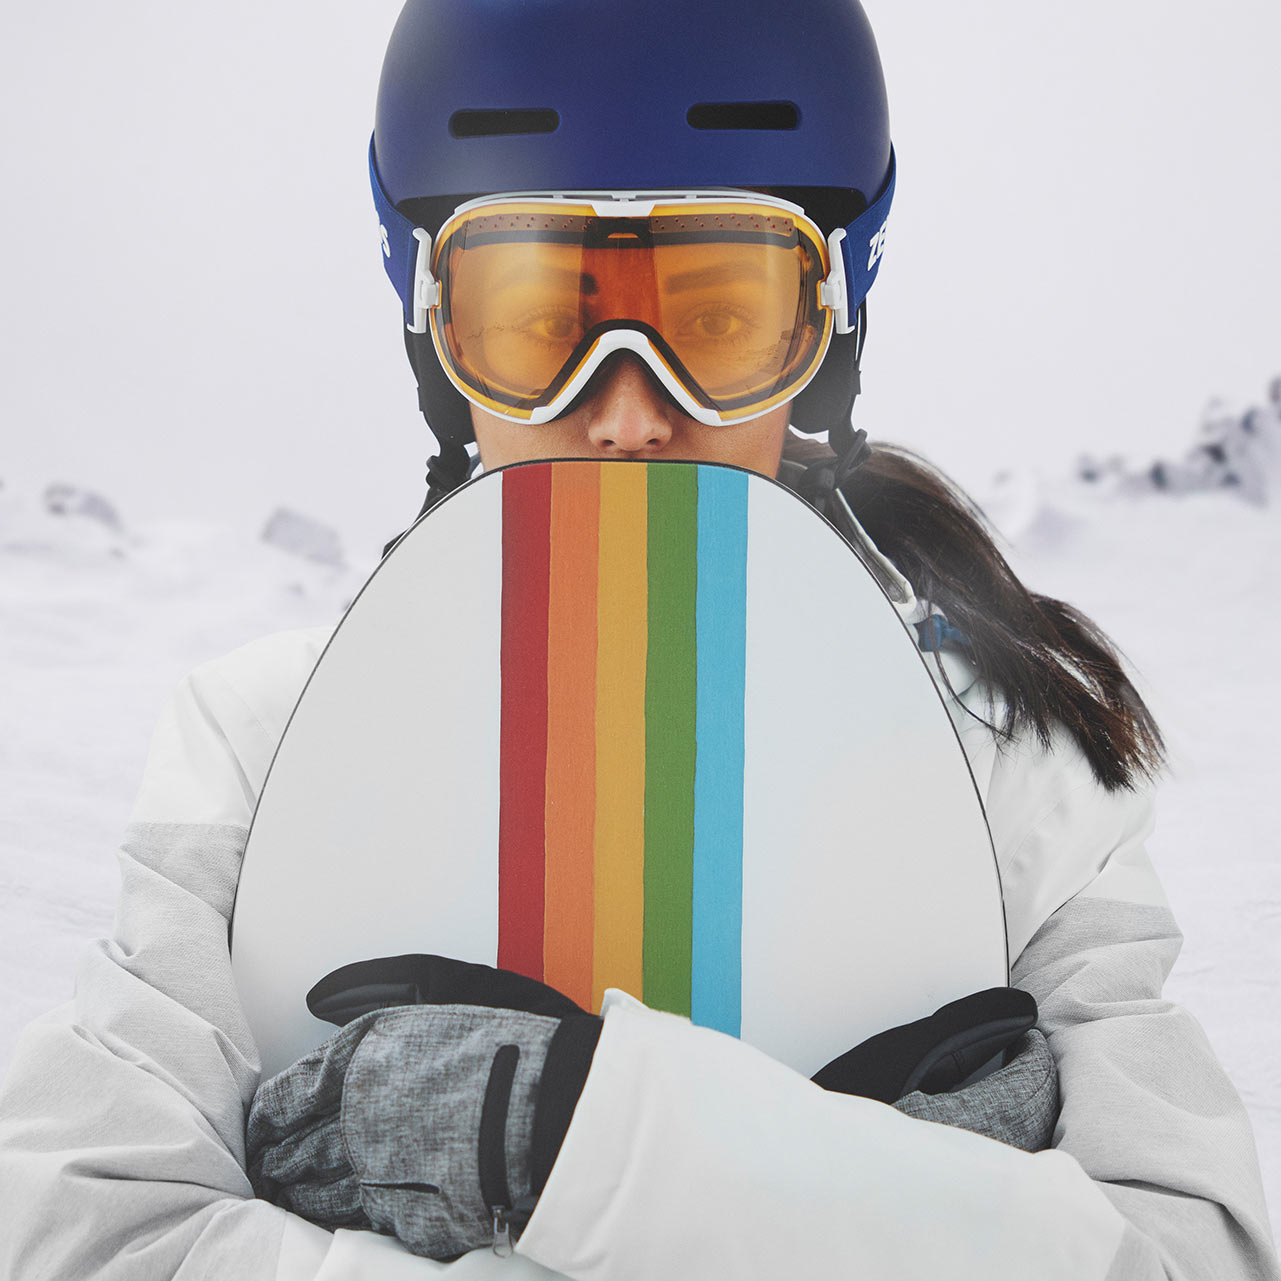 A woman wears a blue helmet and ZEISS ski goggles with transparent visor.